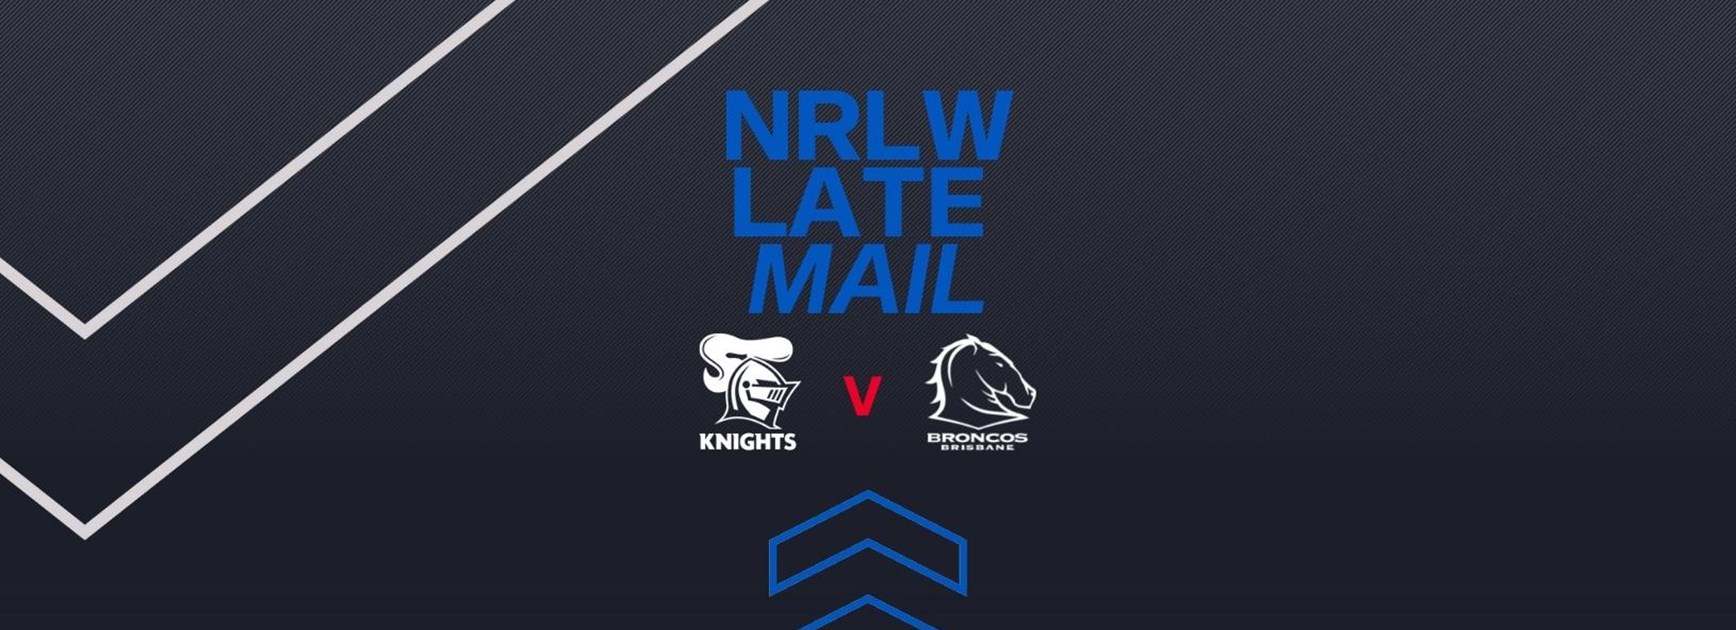 Late Mail: NRLW team confirmed for Broncos clash